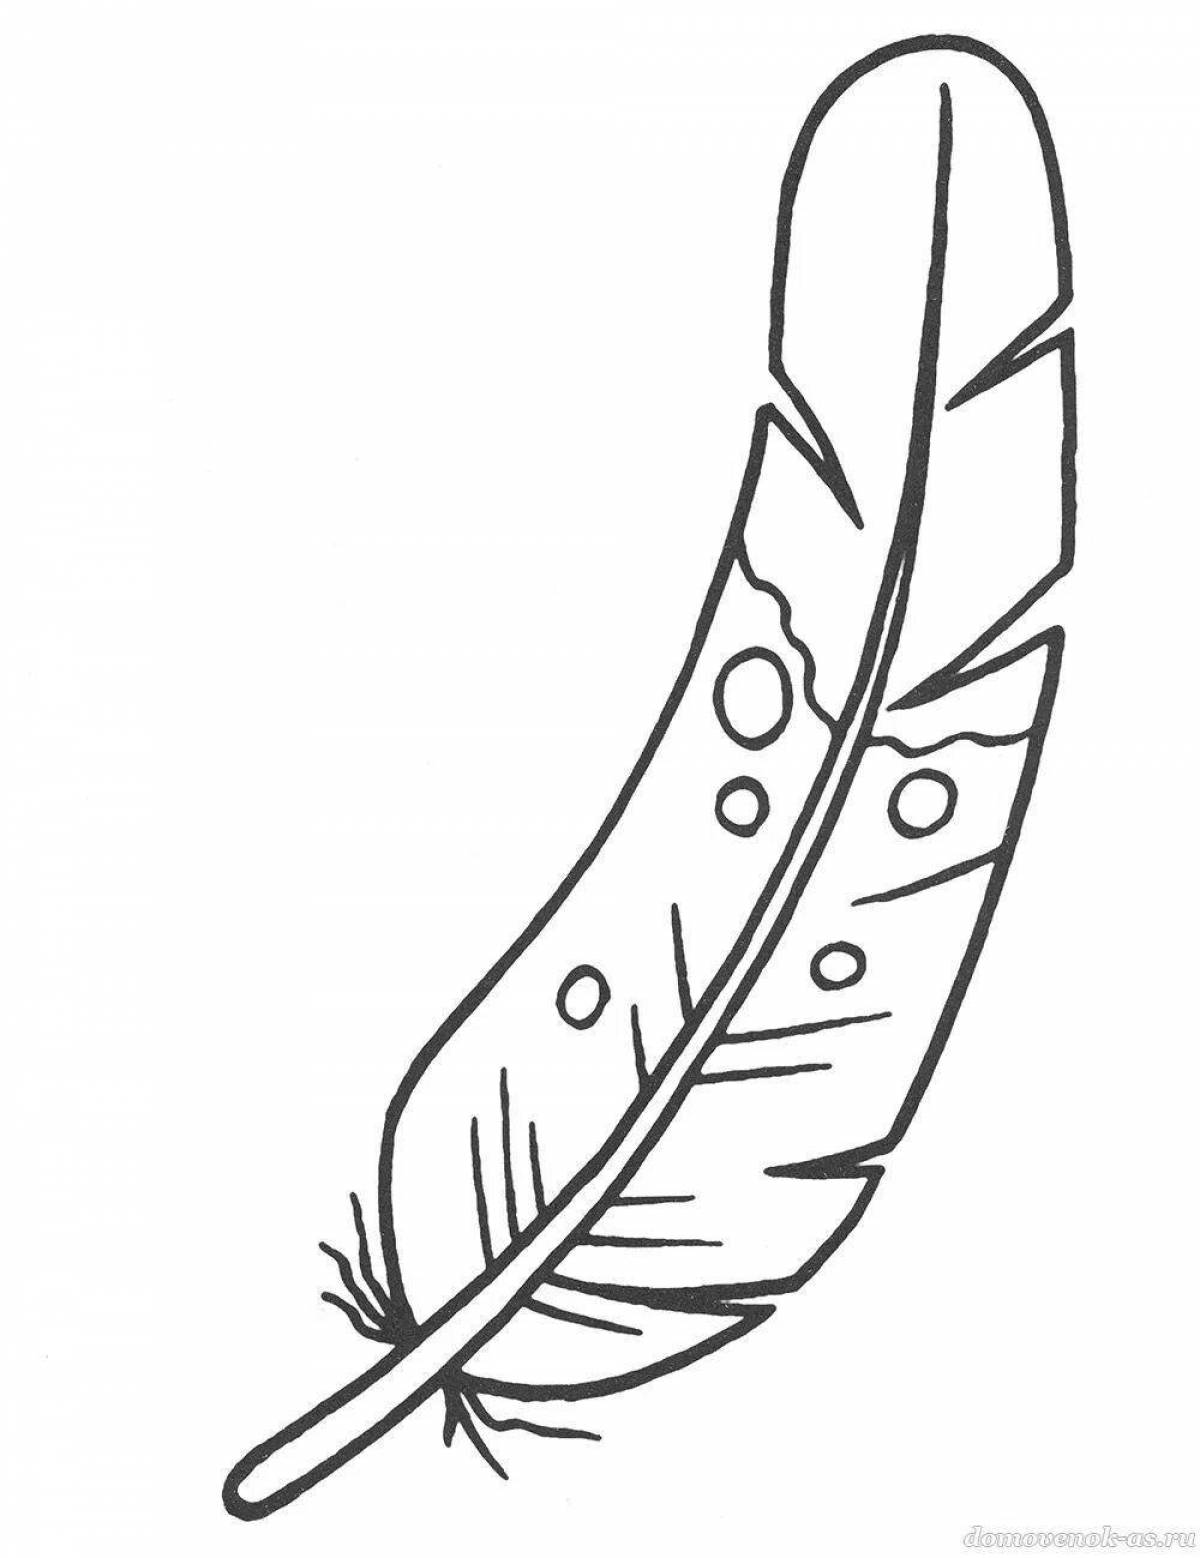 Colorful feather coloring page